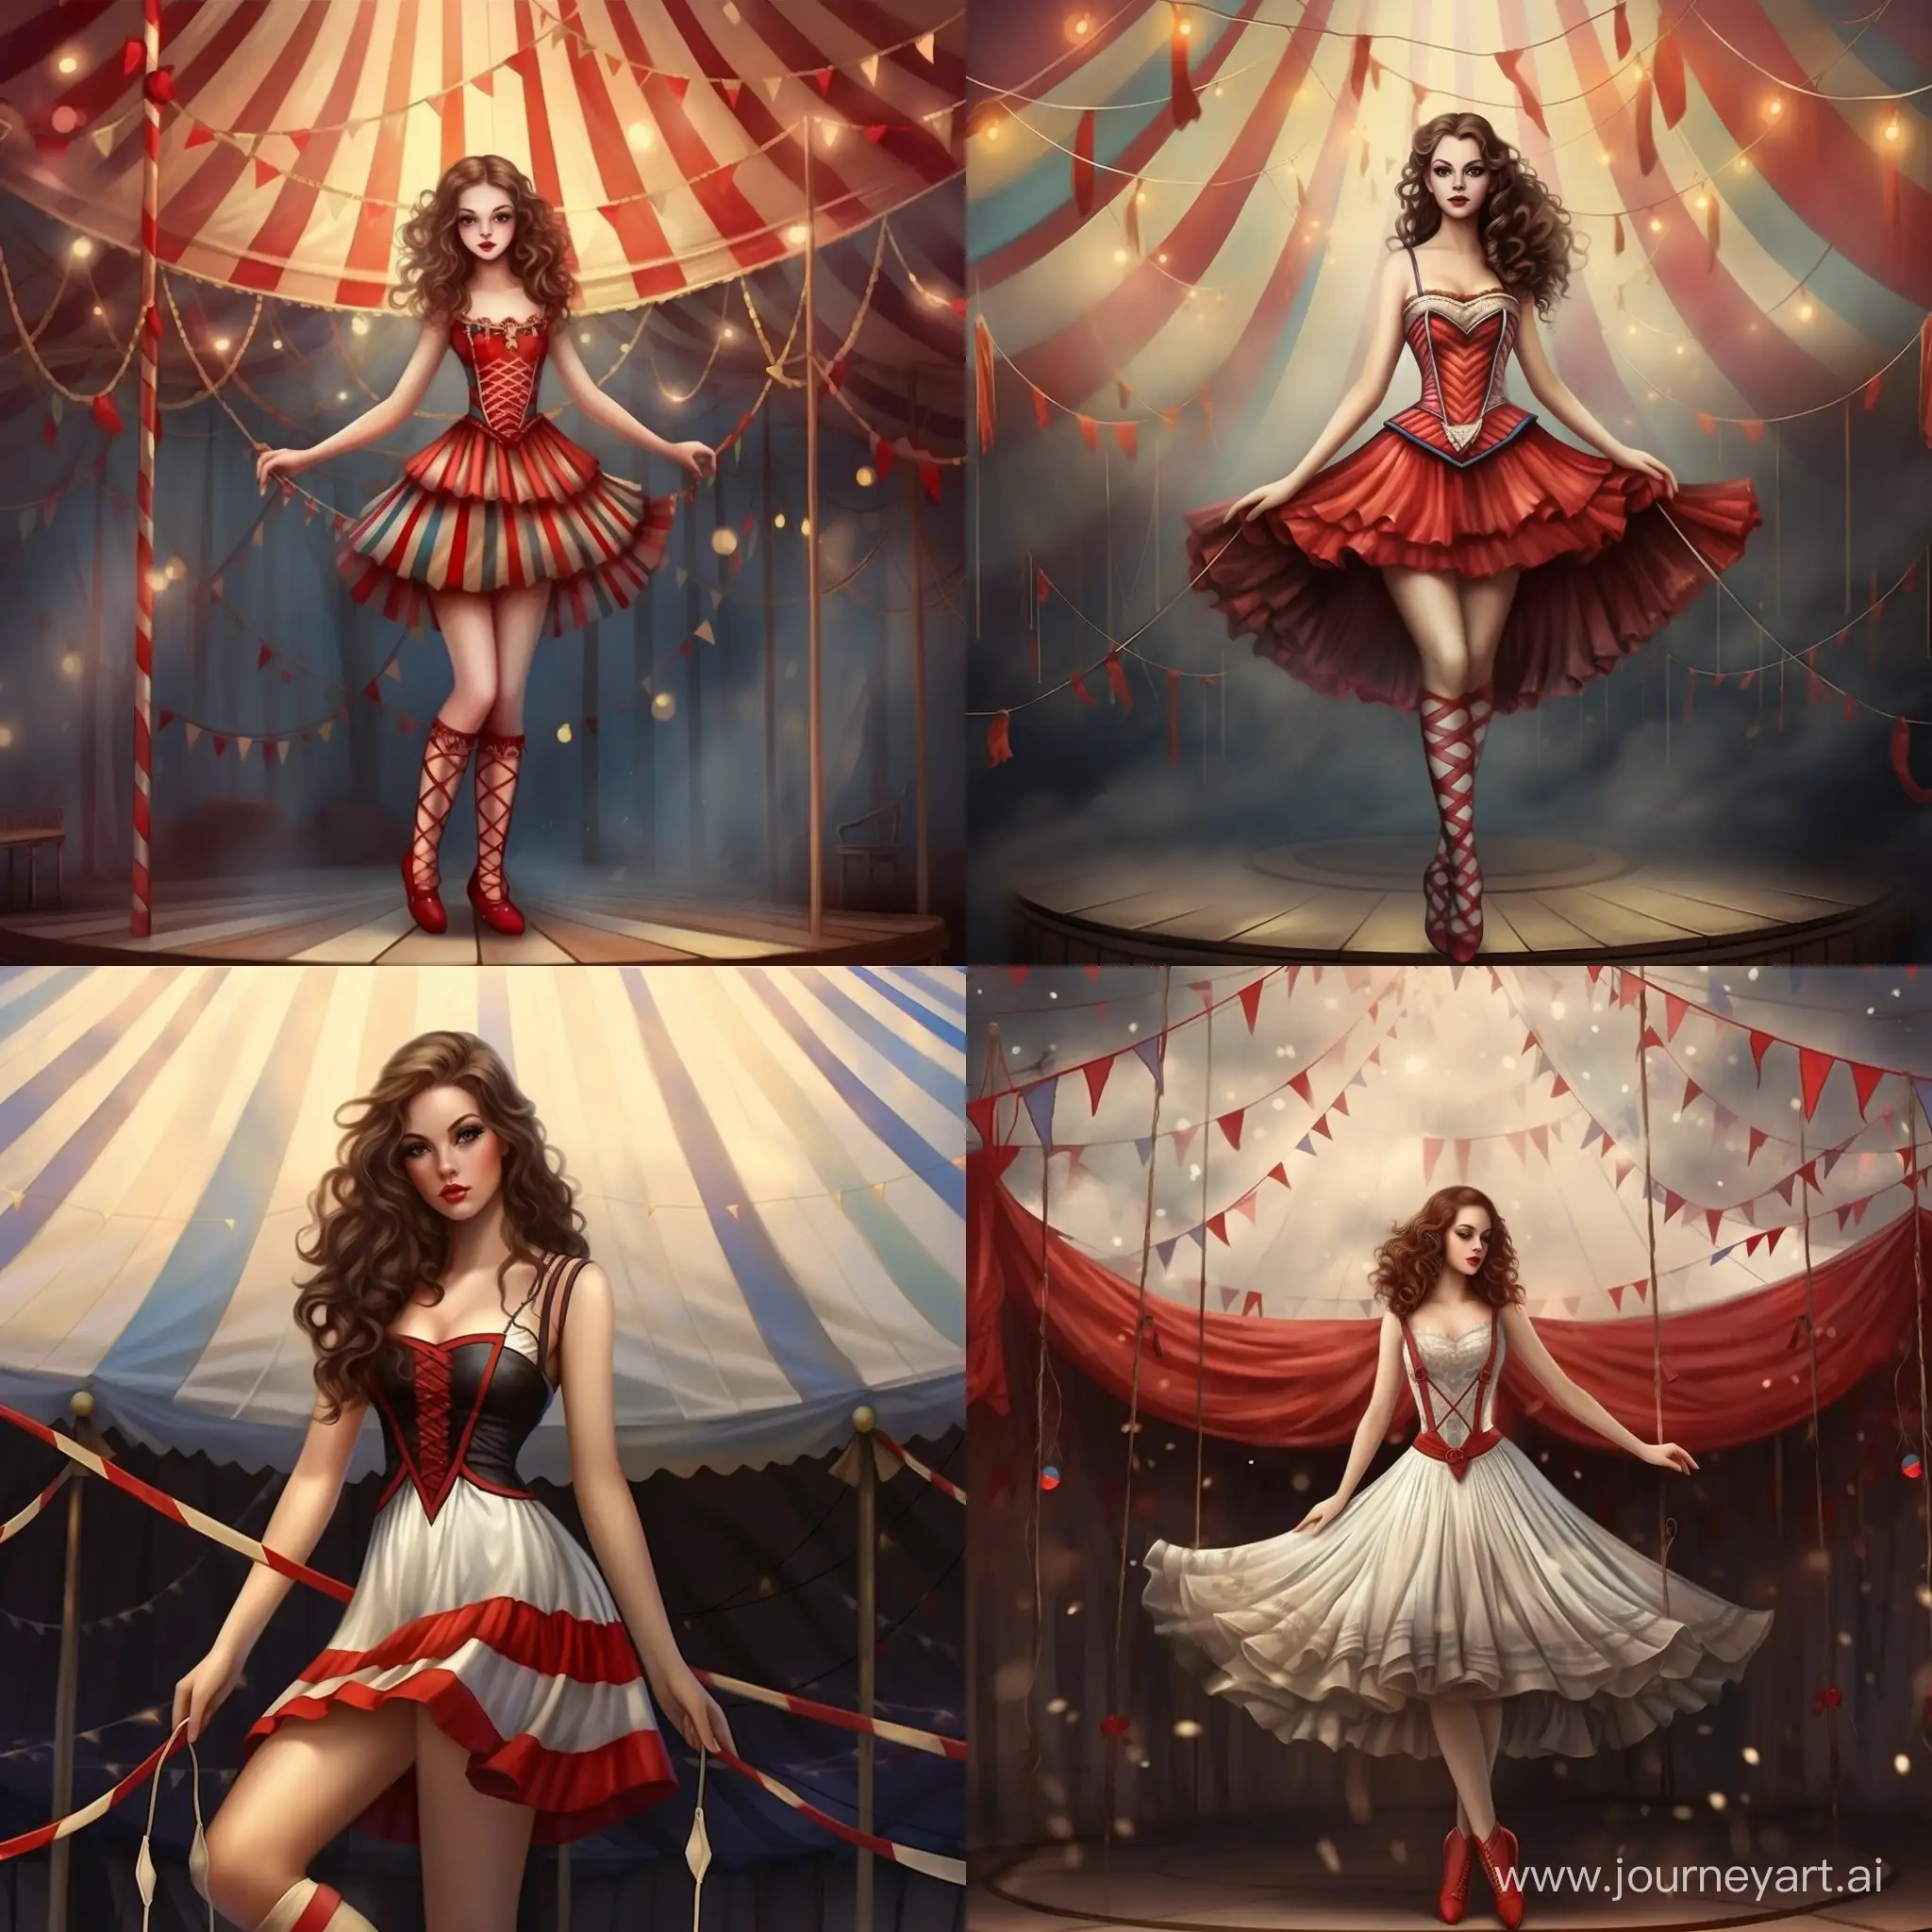 Captivating-Circus-Performer-Talented-Girl-in-Action